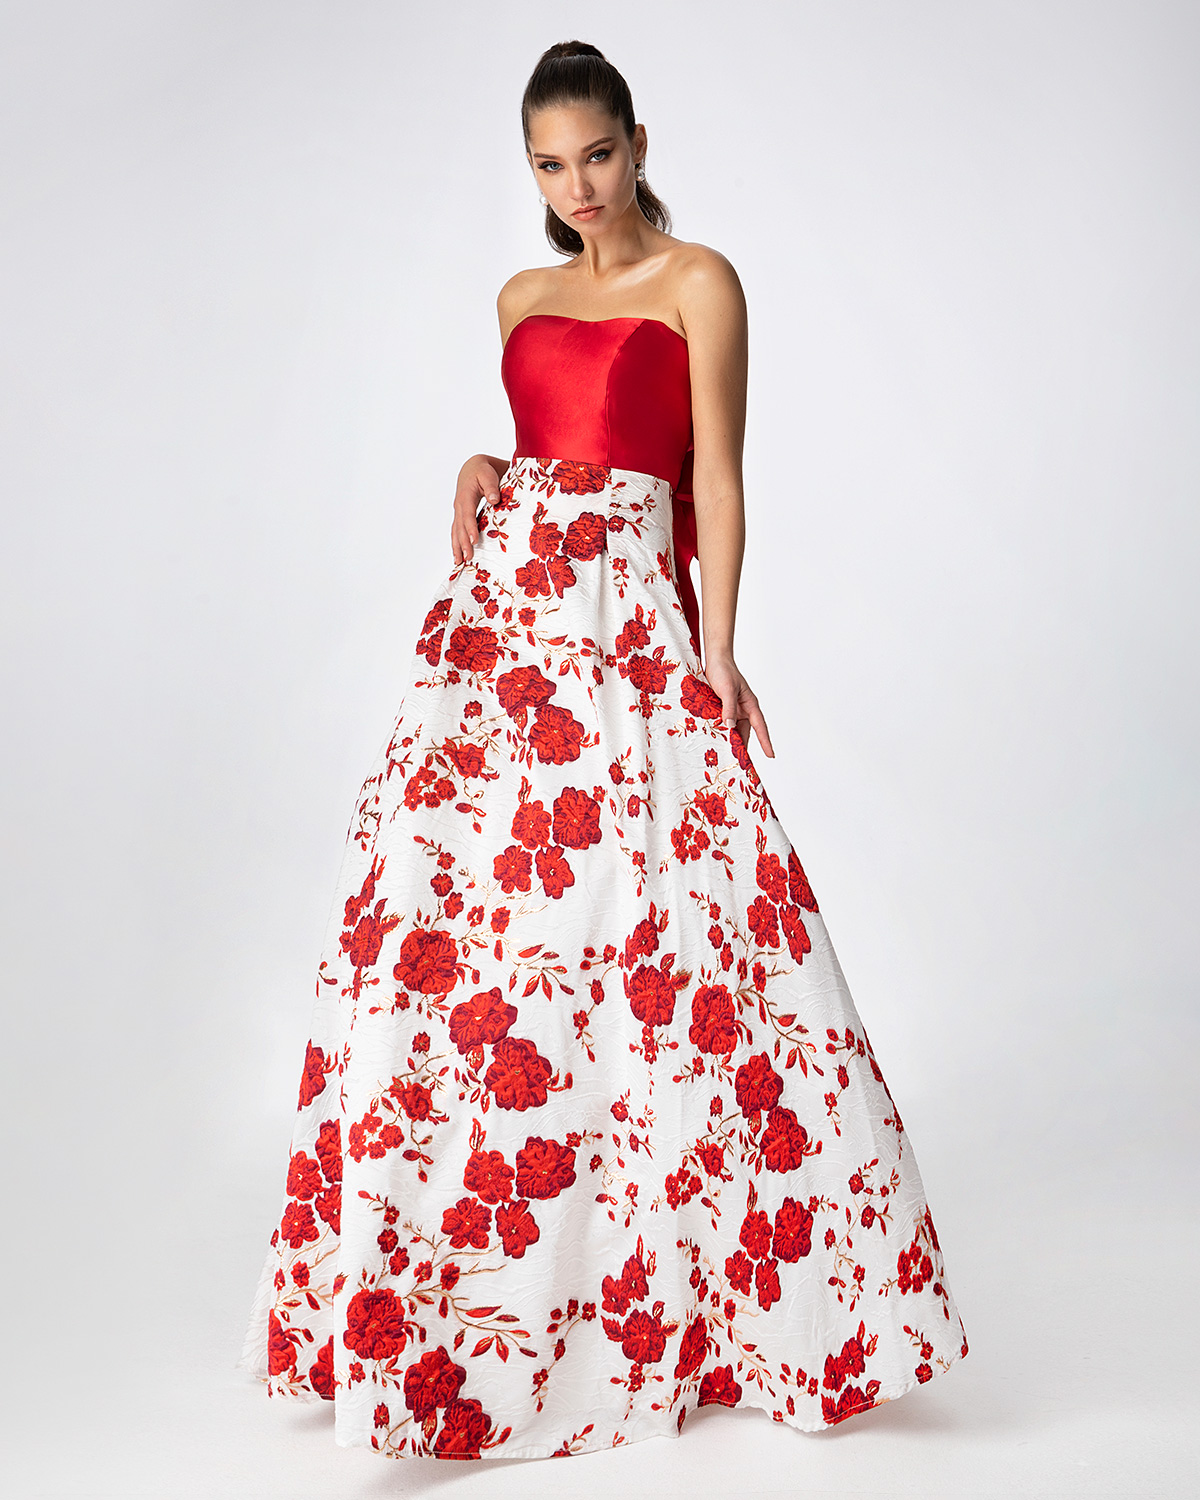 Cocktail Dresses / Long printed brocade skirt with solid color top and big bow in the back